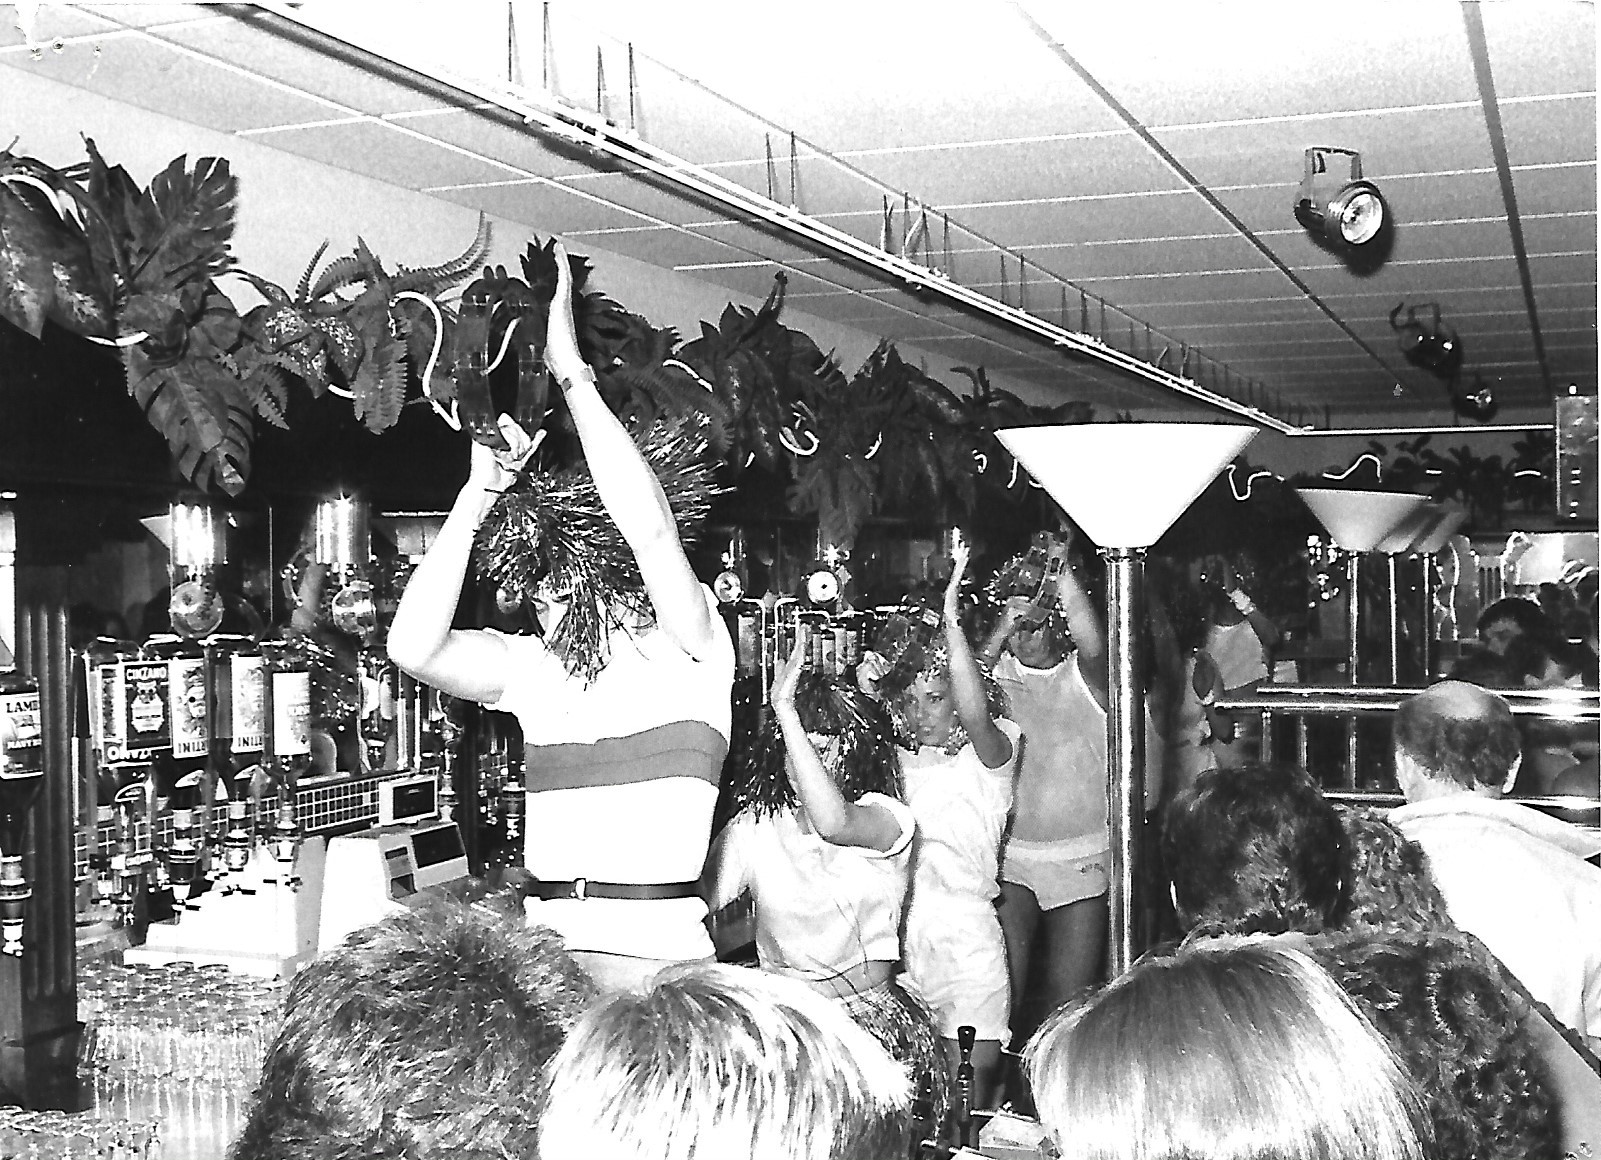 Lots of fancy dress on display at The Pavilion fun pub (later the Fox & Goose) bar in Southport in May 1984